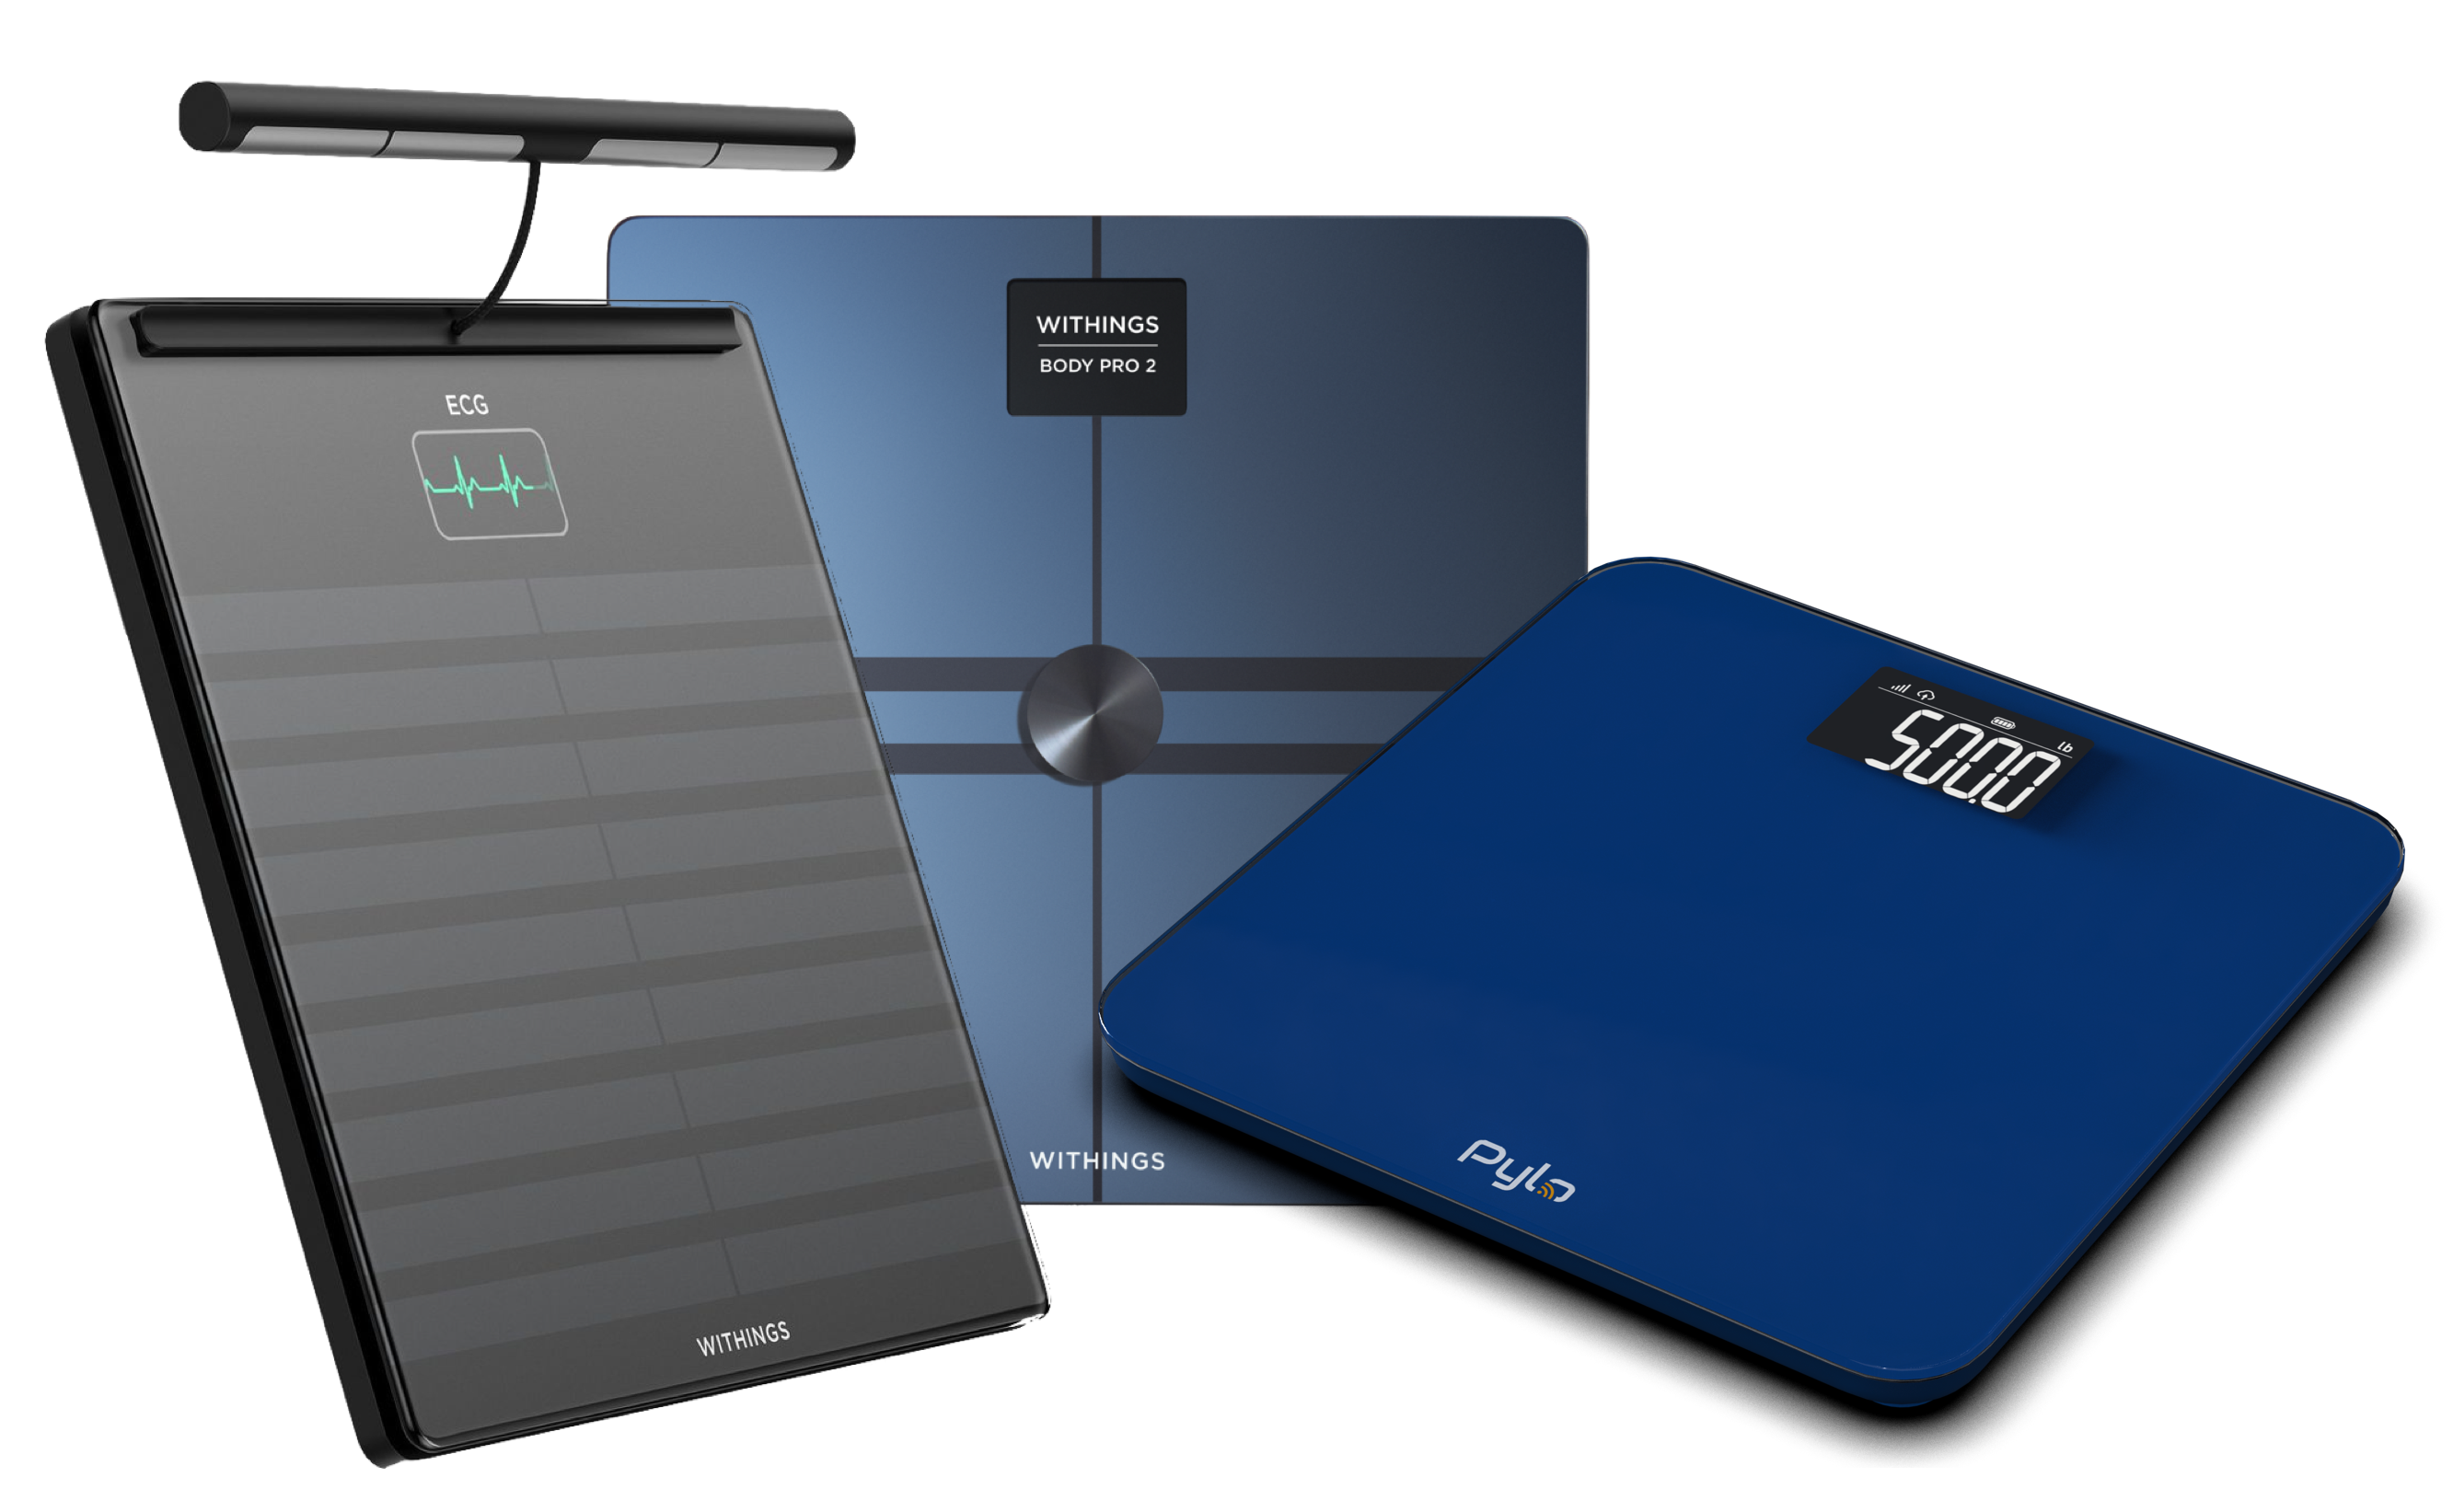 Weight Scales (2 Withings (Body Scan with 6-lead ECG and 4G cellular Body Pro 2) and 1 Pylo PY-200-LTE 4G weight scale)